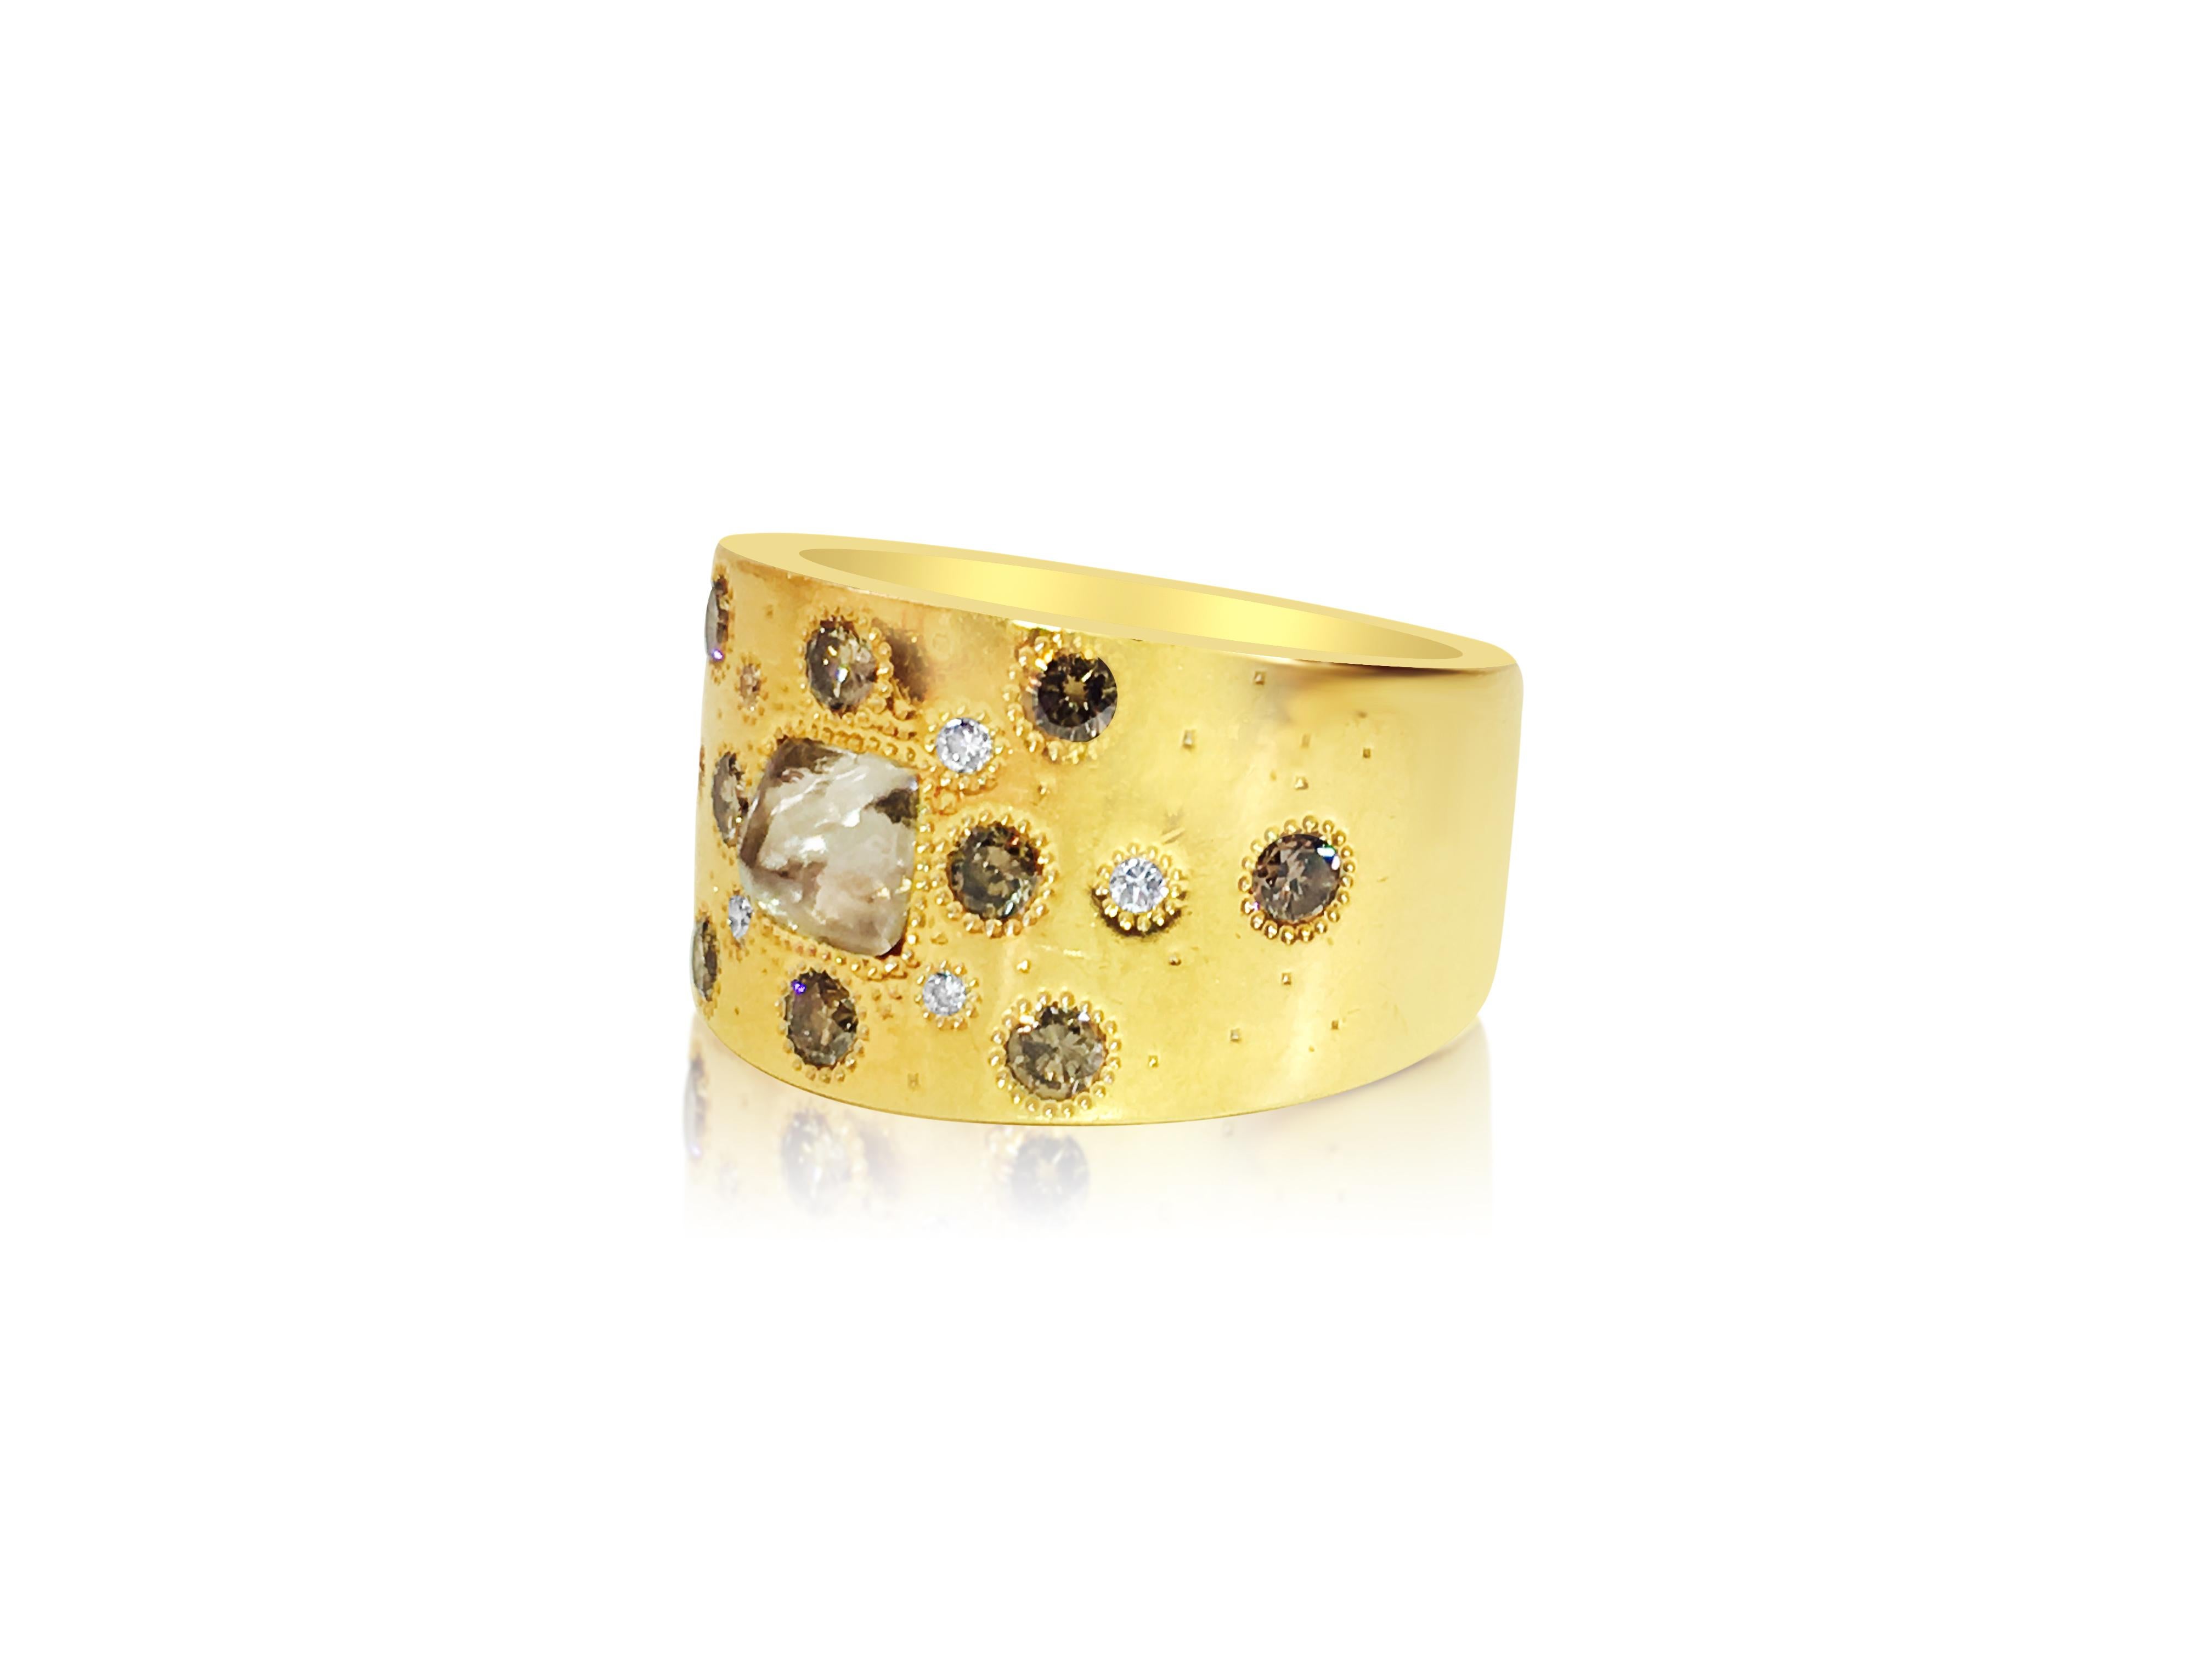 Contemporary De Beers, 18K Yellow Gold & Rough Diamond Ring. For Sale